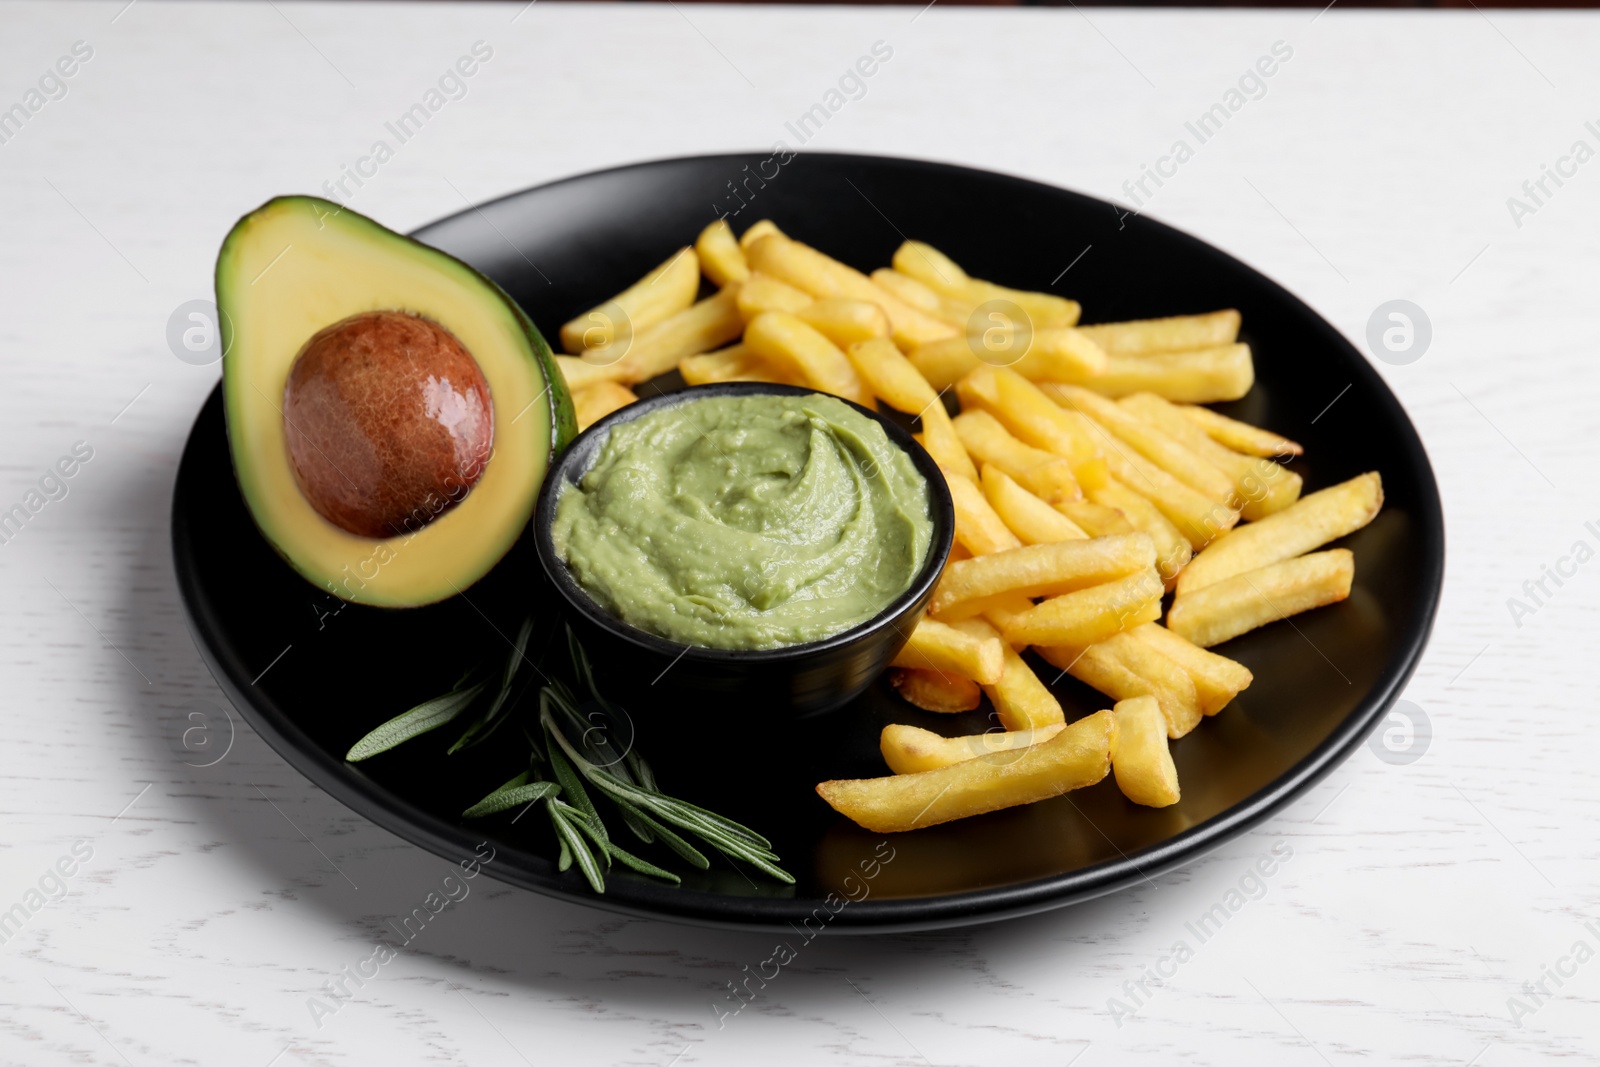 Photo of Plate with french fries, guacamole dip, rosemary and avocado served on white wooden table